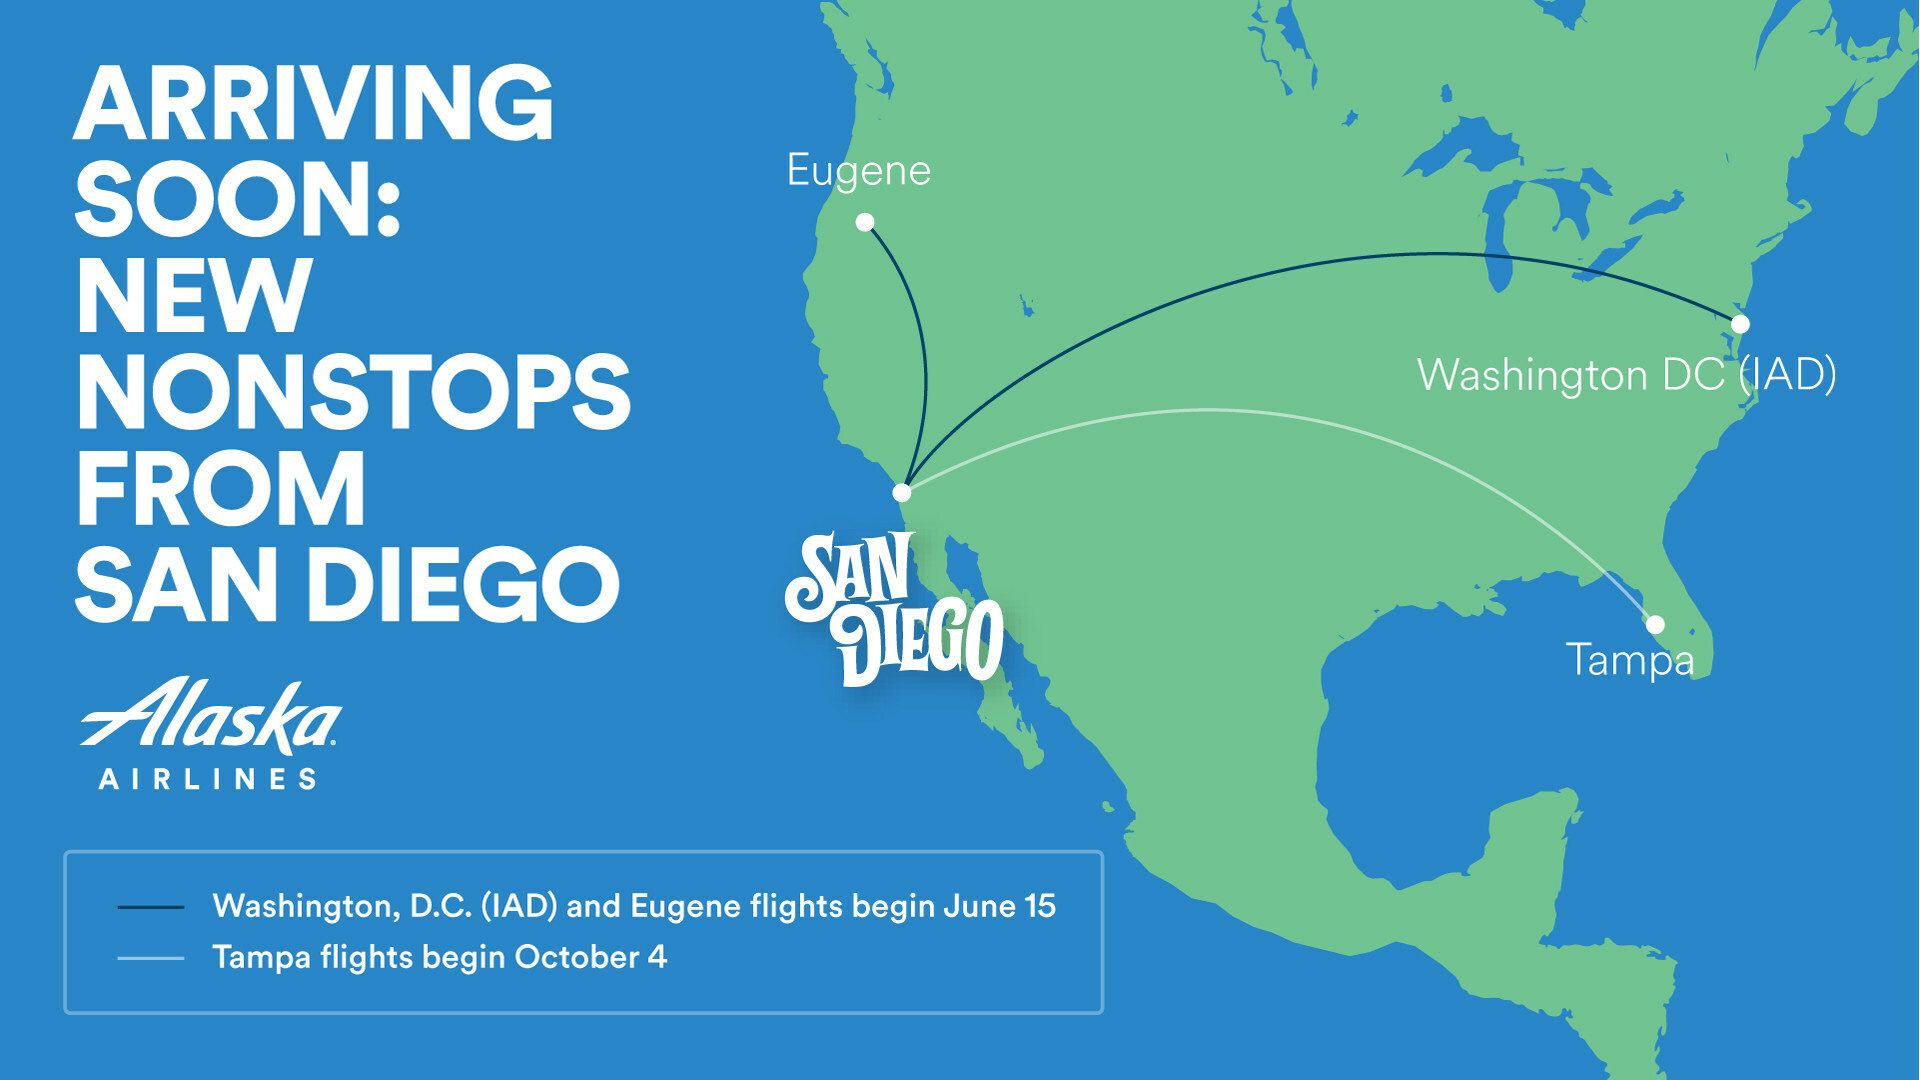 Alaska Airlines' new routes from San Diego